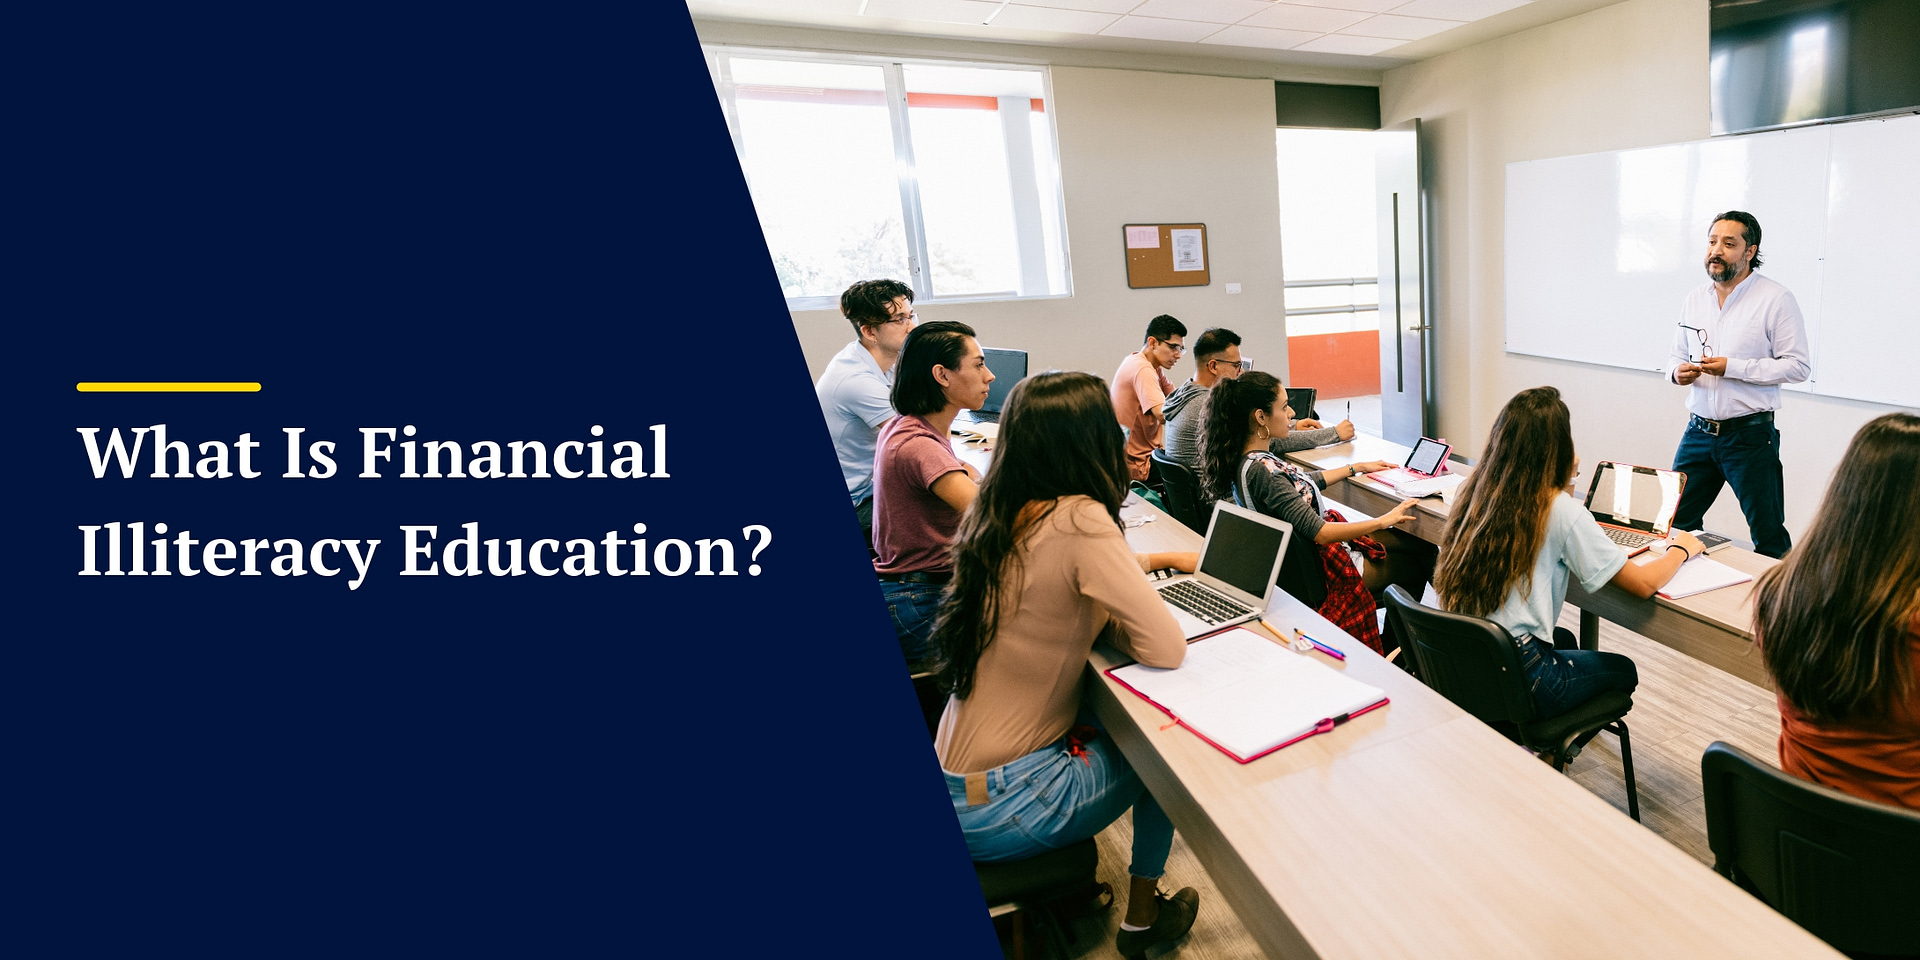 What Is Financial Illiteracy Education?